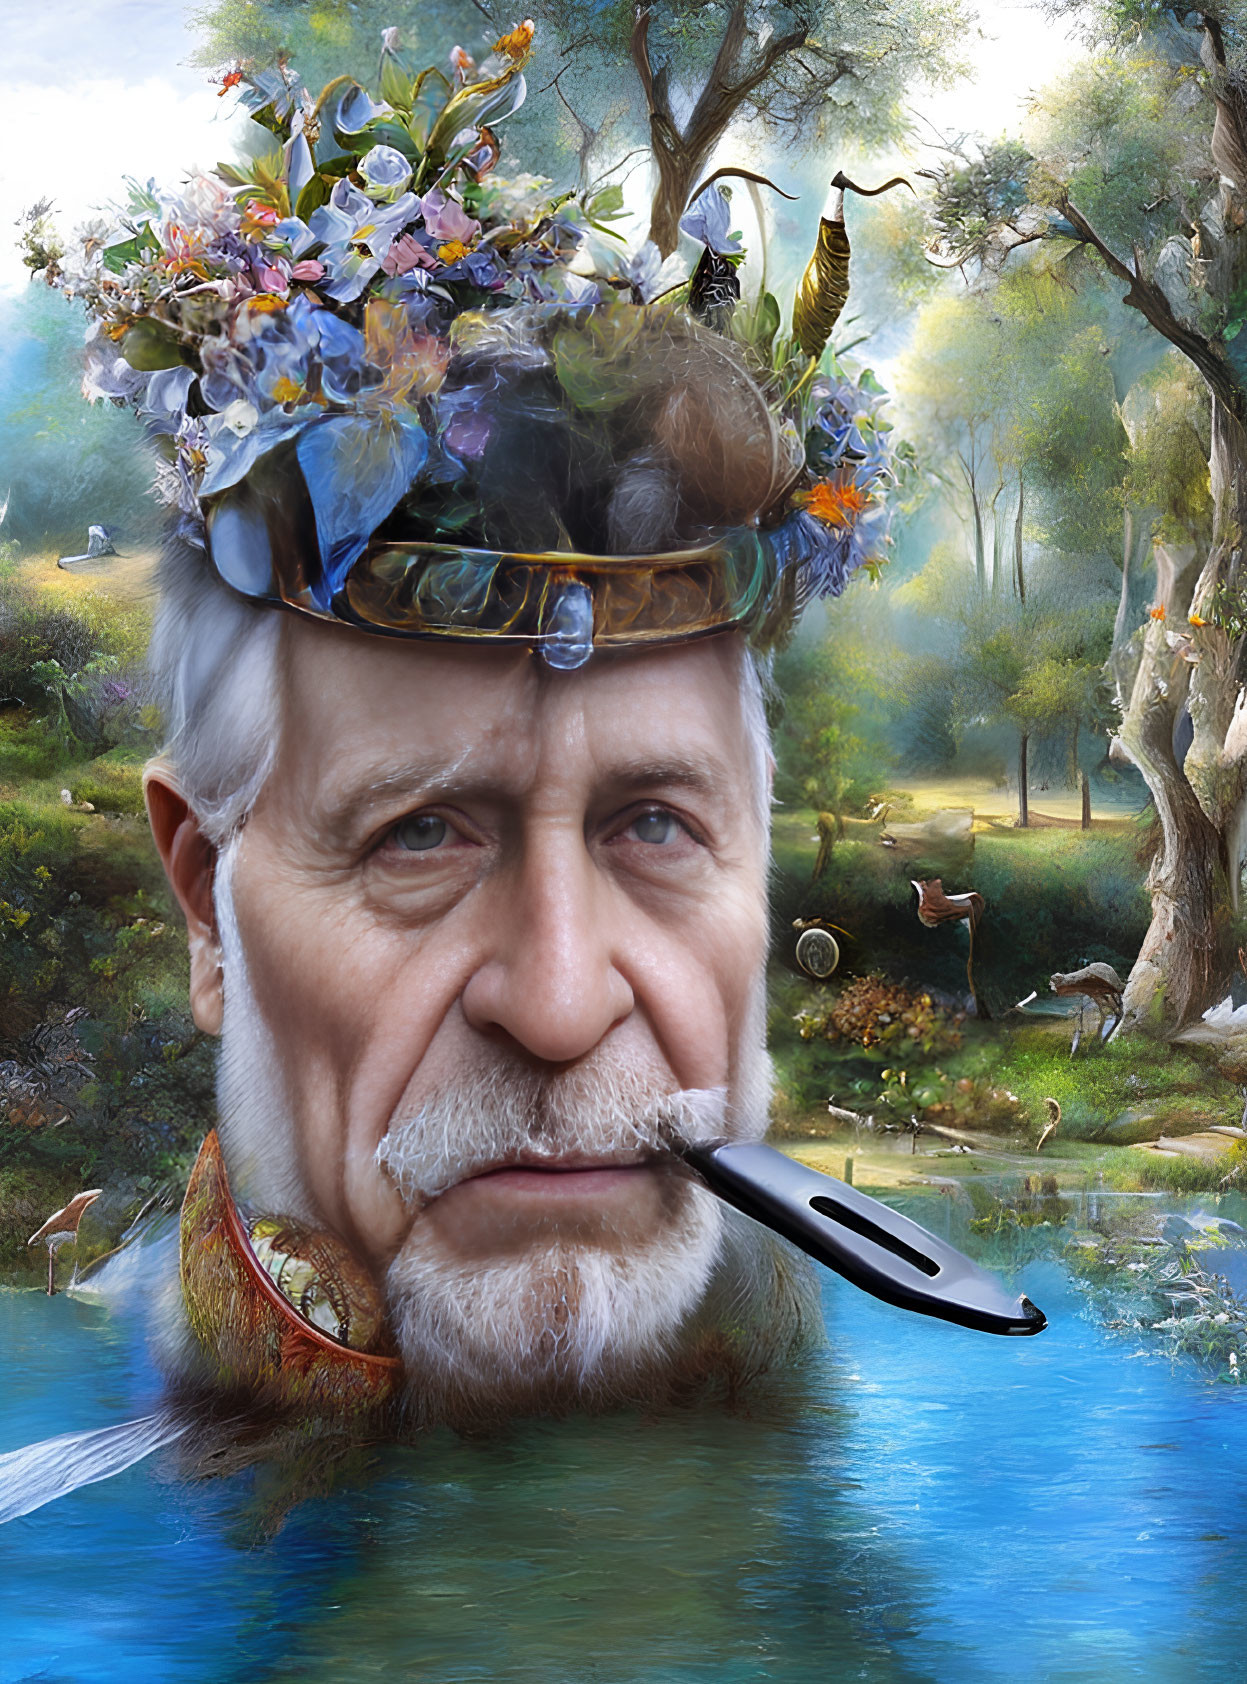 Portrait of man with floral headband in surreal nature scene